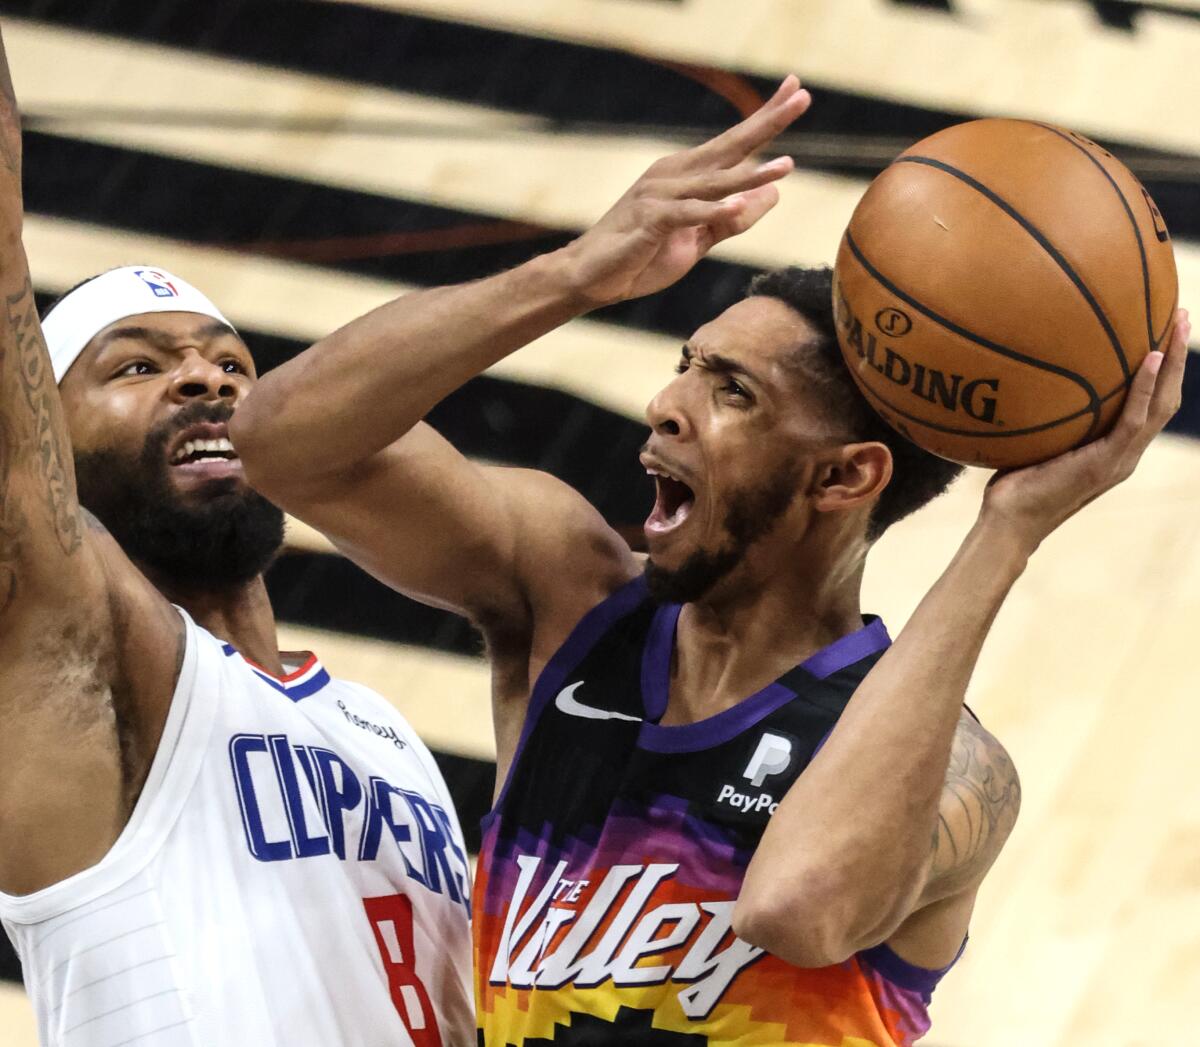 Suns guard Cameron Payne tries to score on a drive against Clippers forward Marcus Morris Sr. during Game 2.